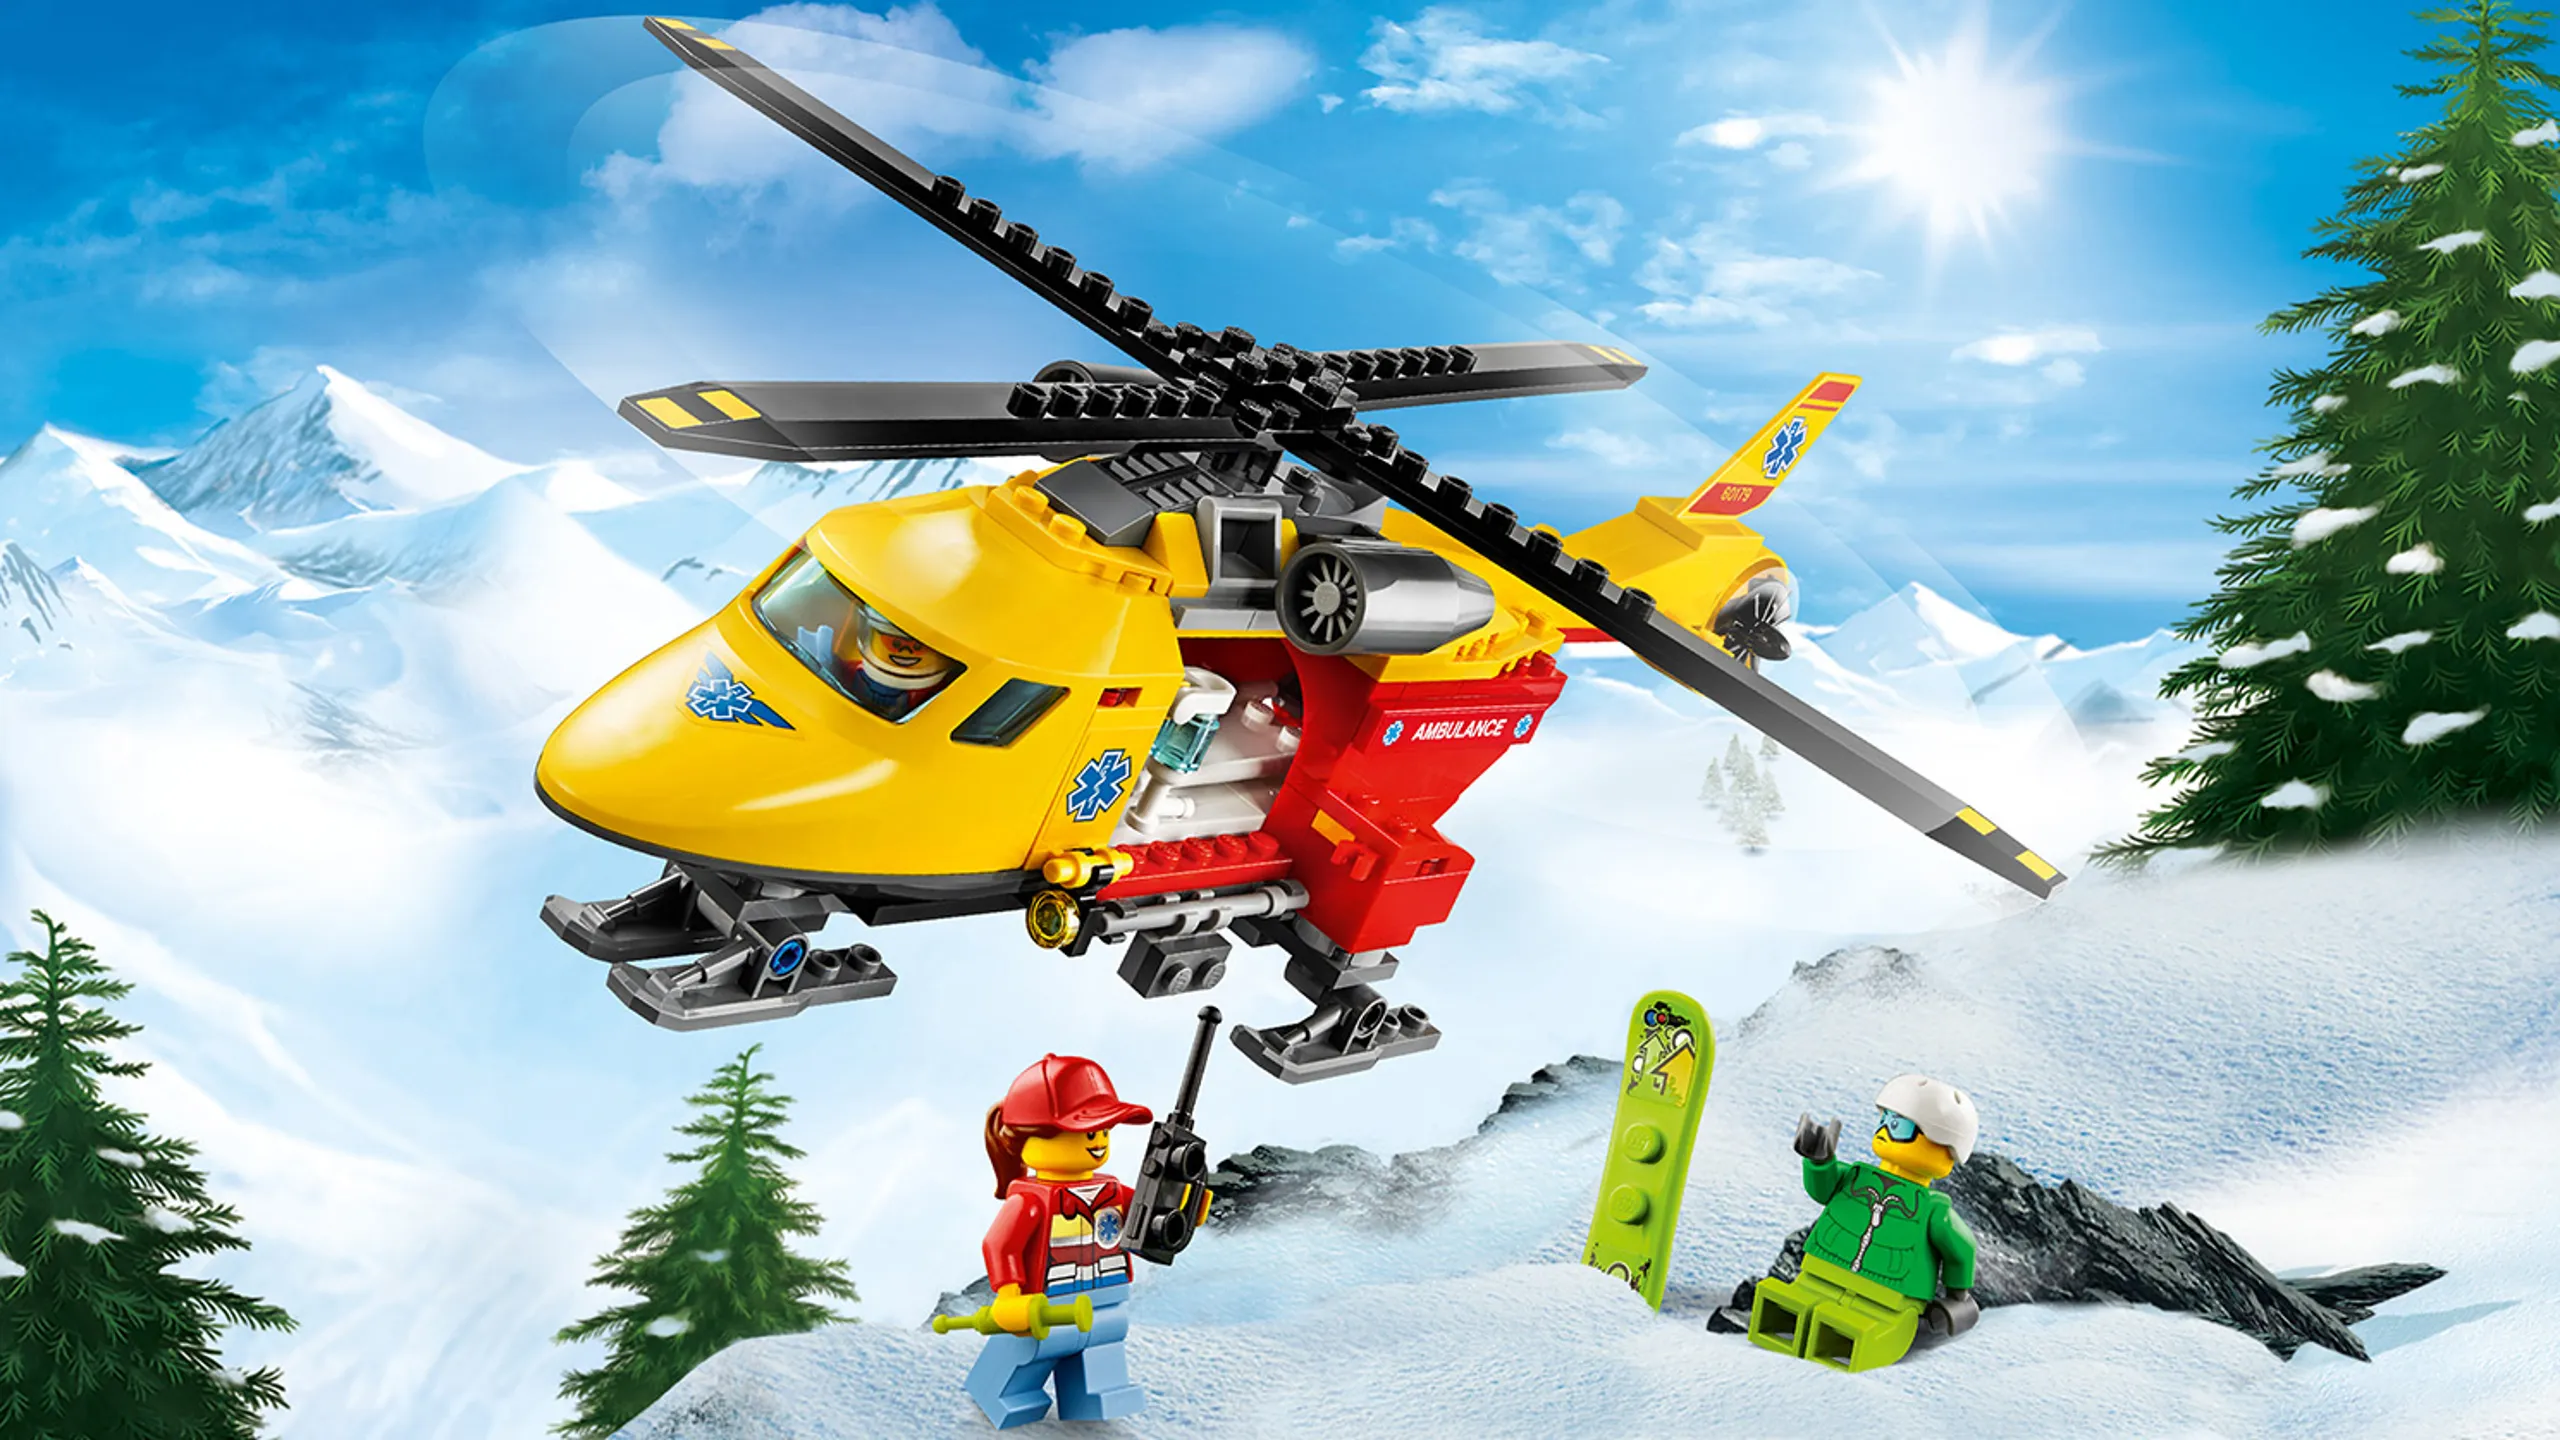 LEGO City Great Vehicles - 60179 Ambulance Helicopter - Take the ambulance helicopter to fly to the mountain to save a snowboarder who crashed.